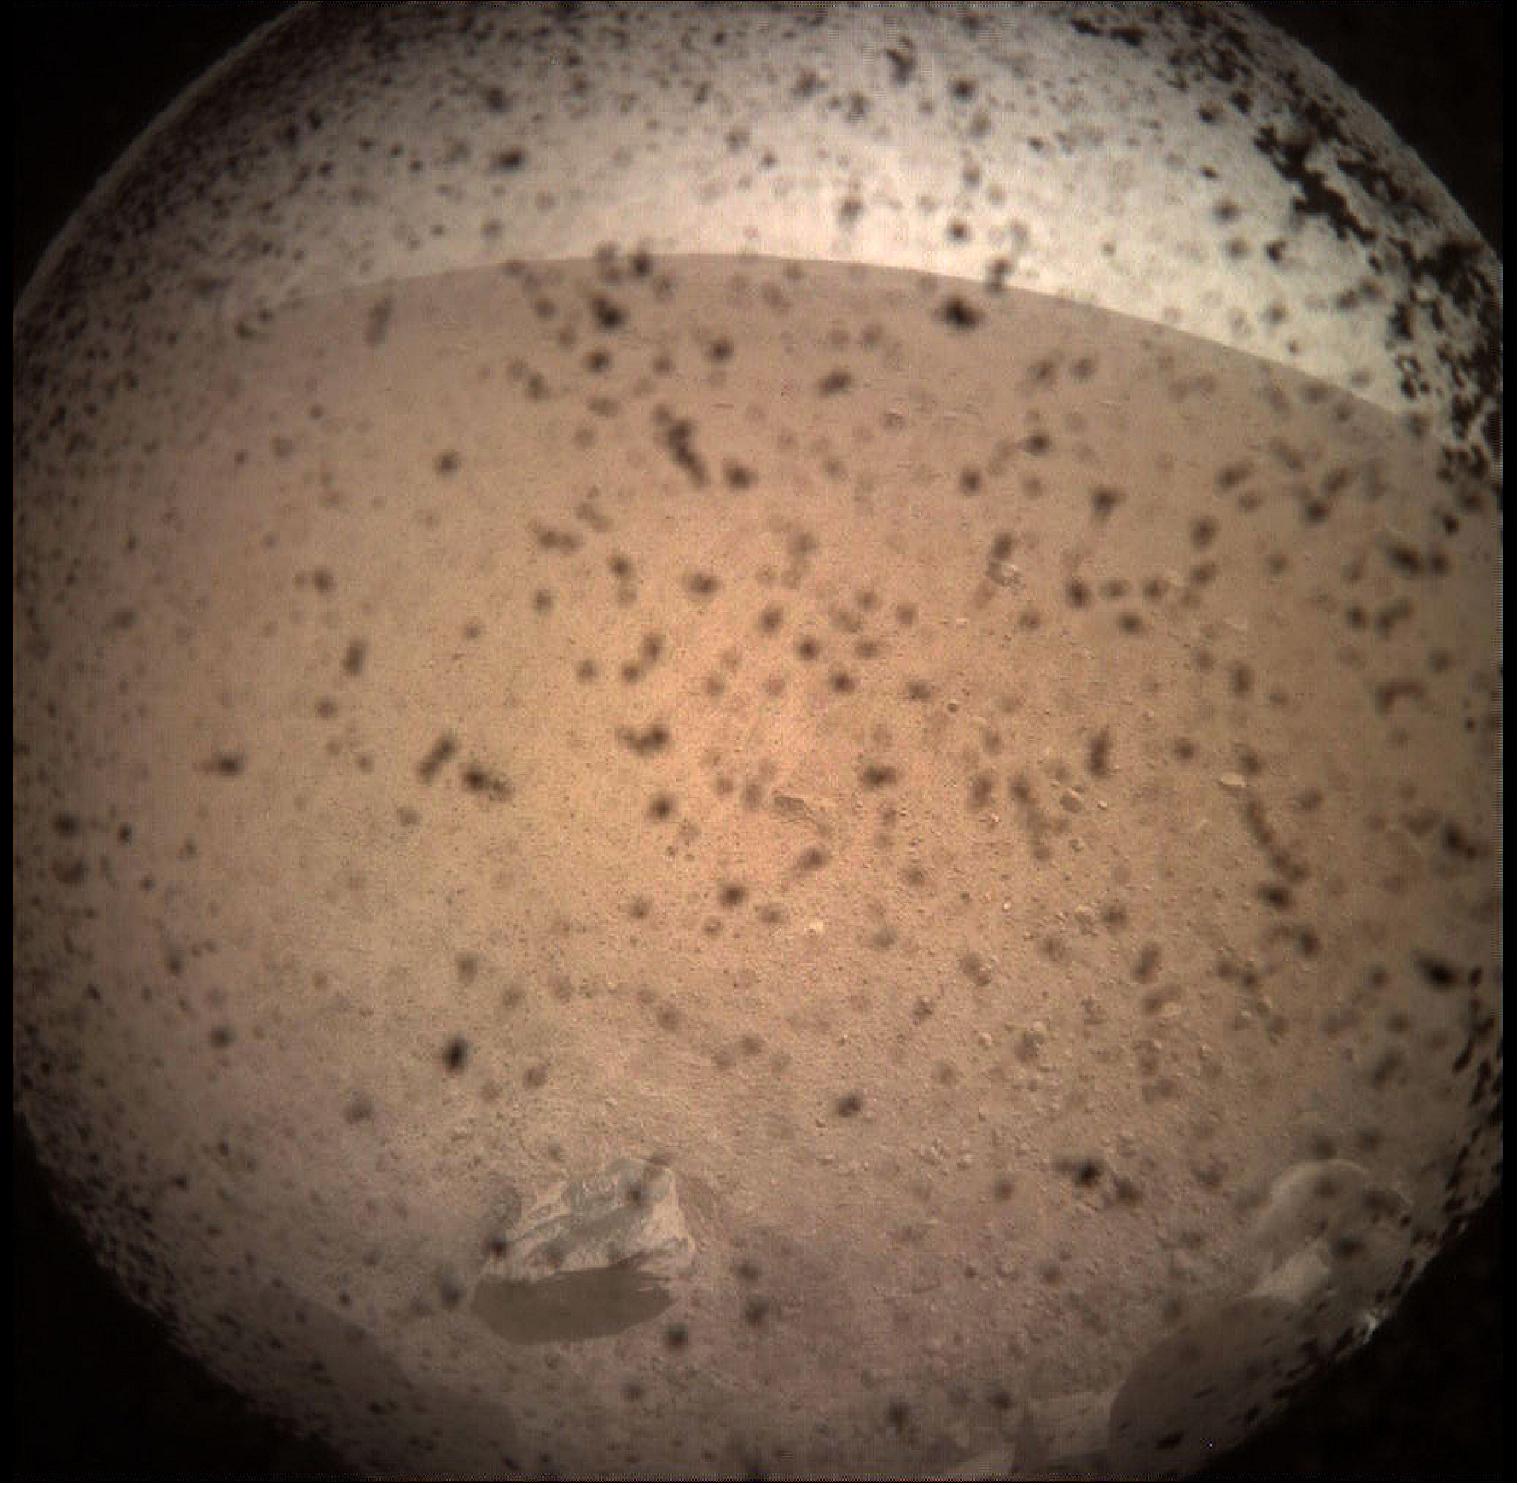 Figure 56: NASA's InSight Mars lander acquired this image of the area in front of the lander using its lander-mounted, Instrument Context Camera (ICC). This image was acquired on Nov. 26, 2018, Sol 0 of the InSight mission where the local mean solar time for the image exposures was 13:34:21. Each ICC image has a field of view of 124 x 124 degrees (image credit: NASA/JPL-CalTech)